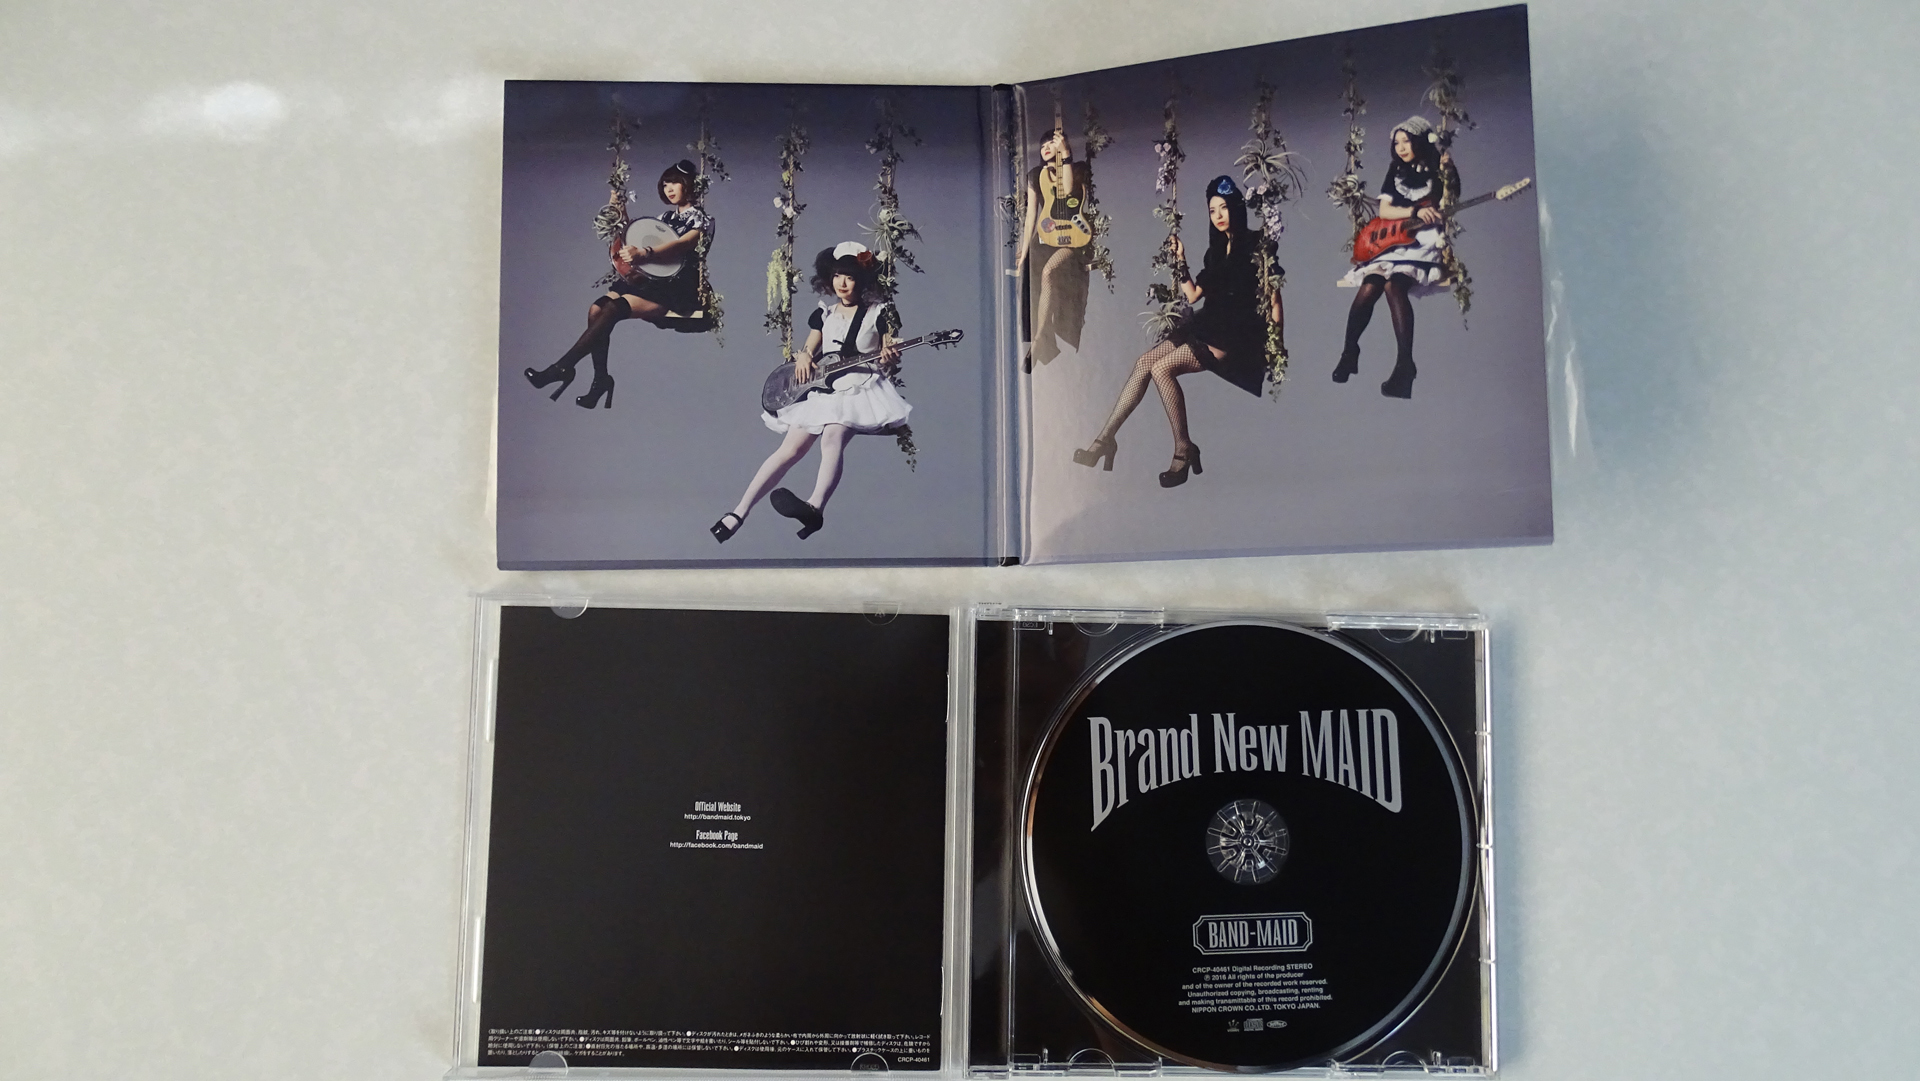 Band-Maid Brand New Maid Review | hXcHector.com